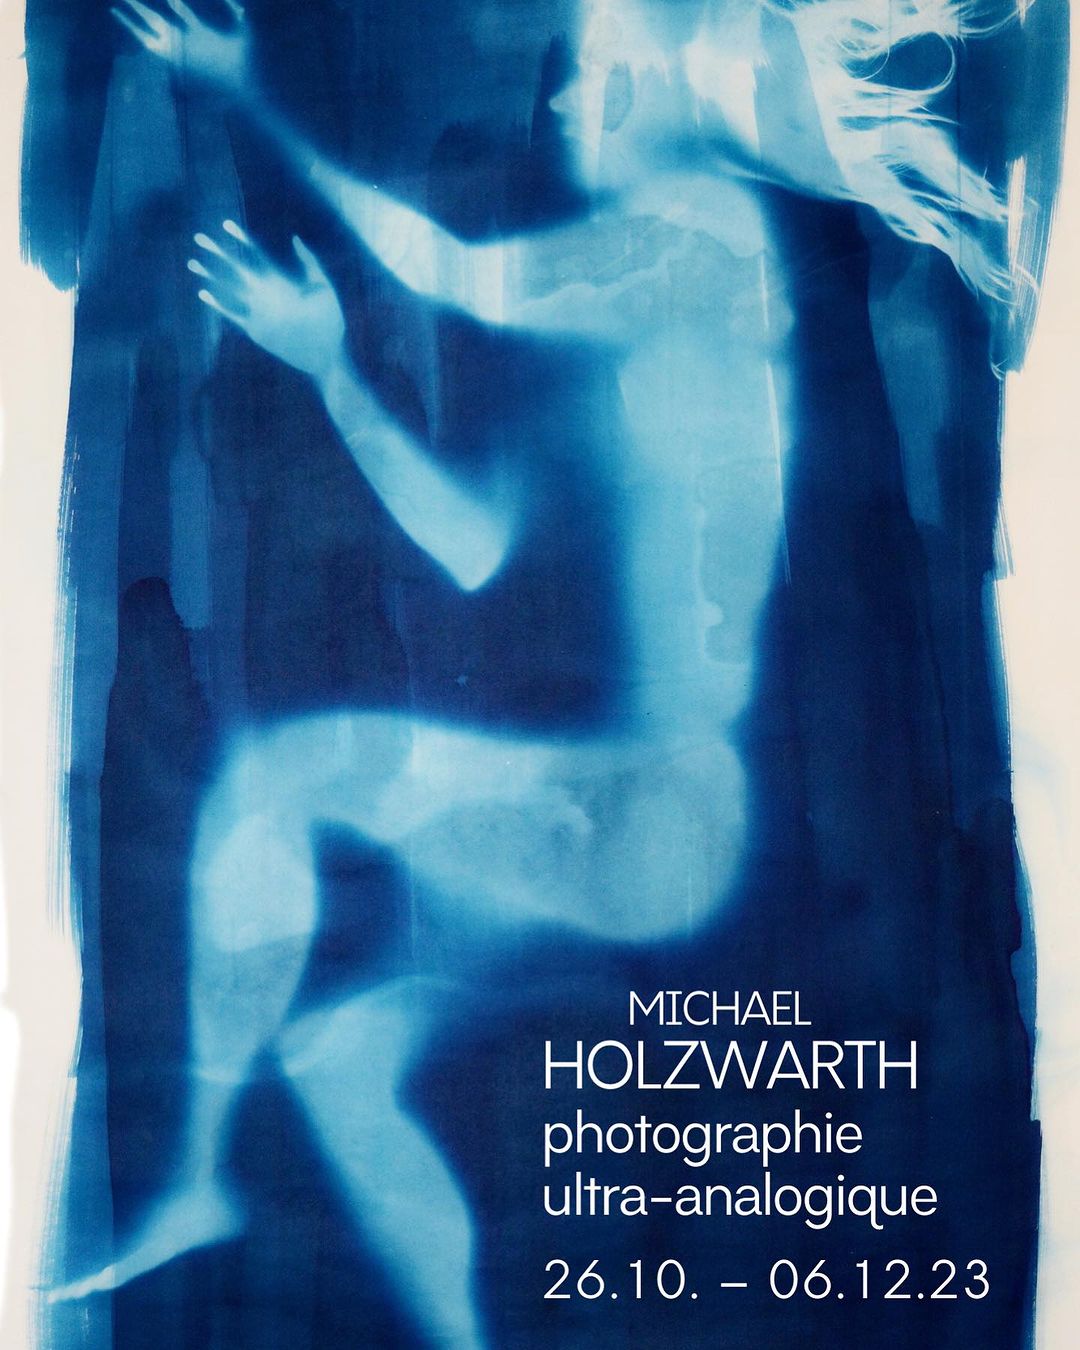 Michael Holzwarth<br />
"photographie ultra-analogique"